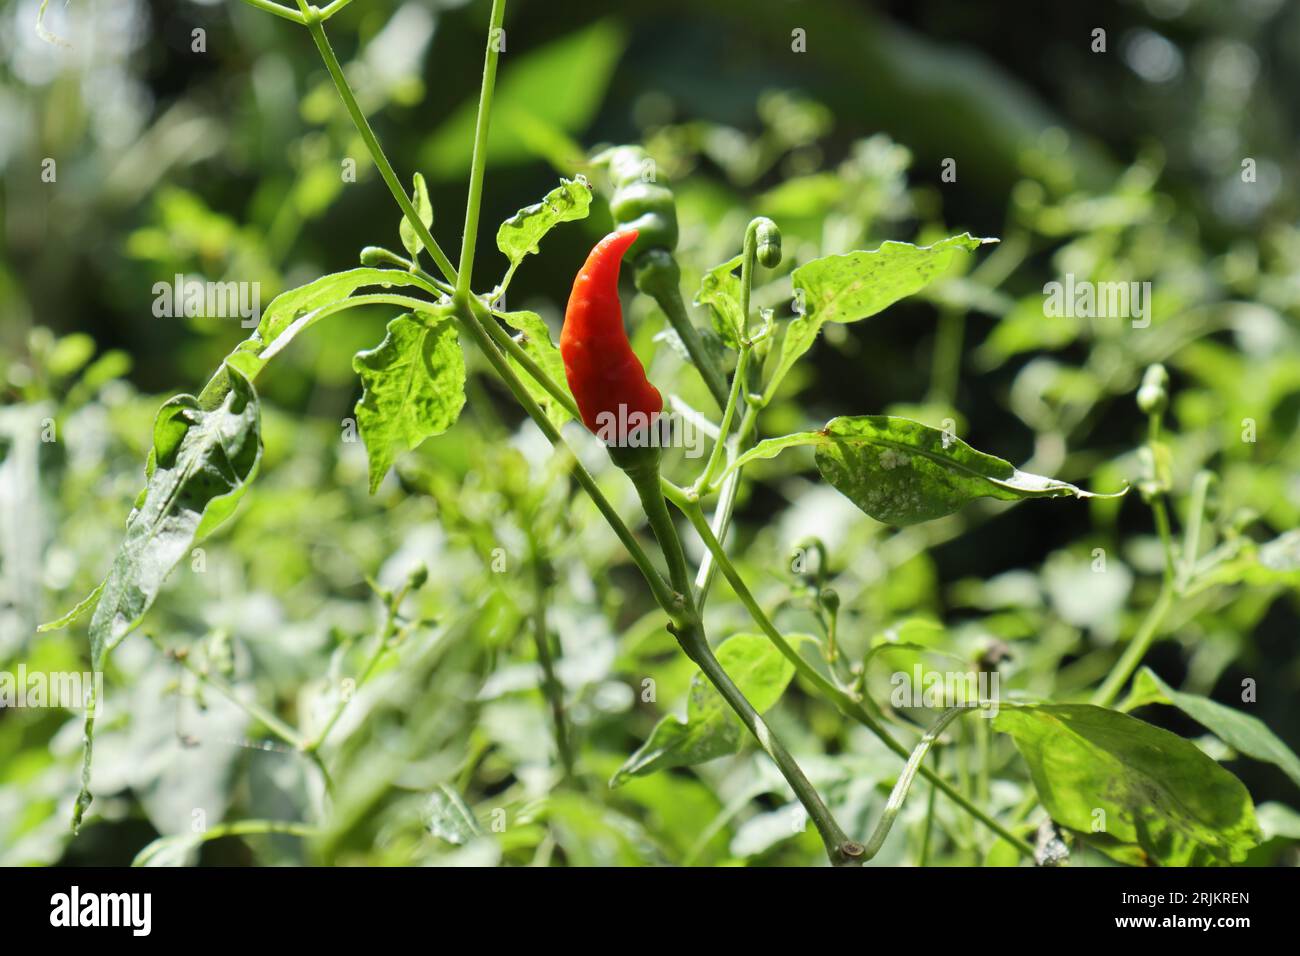 View of a Bird's eye chili twig, the twig is in direct sunlight with a ripen chili pod and leaves are infected by the Mealybugs Stock Photo